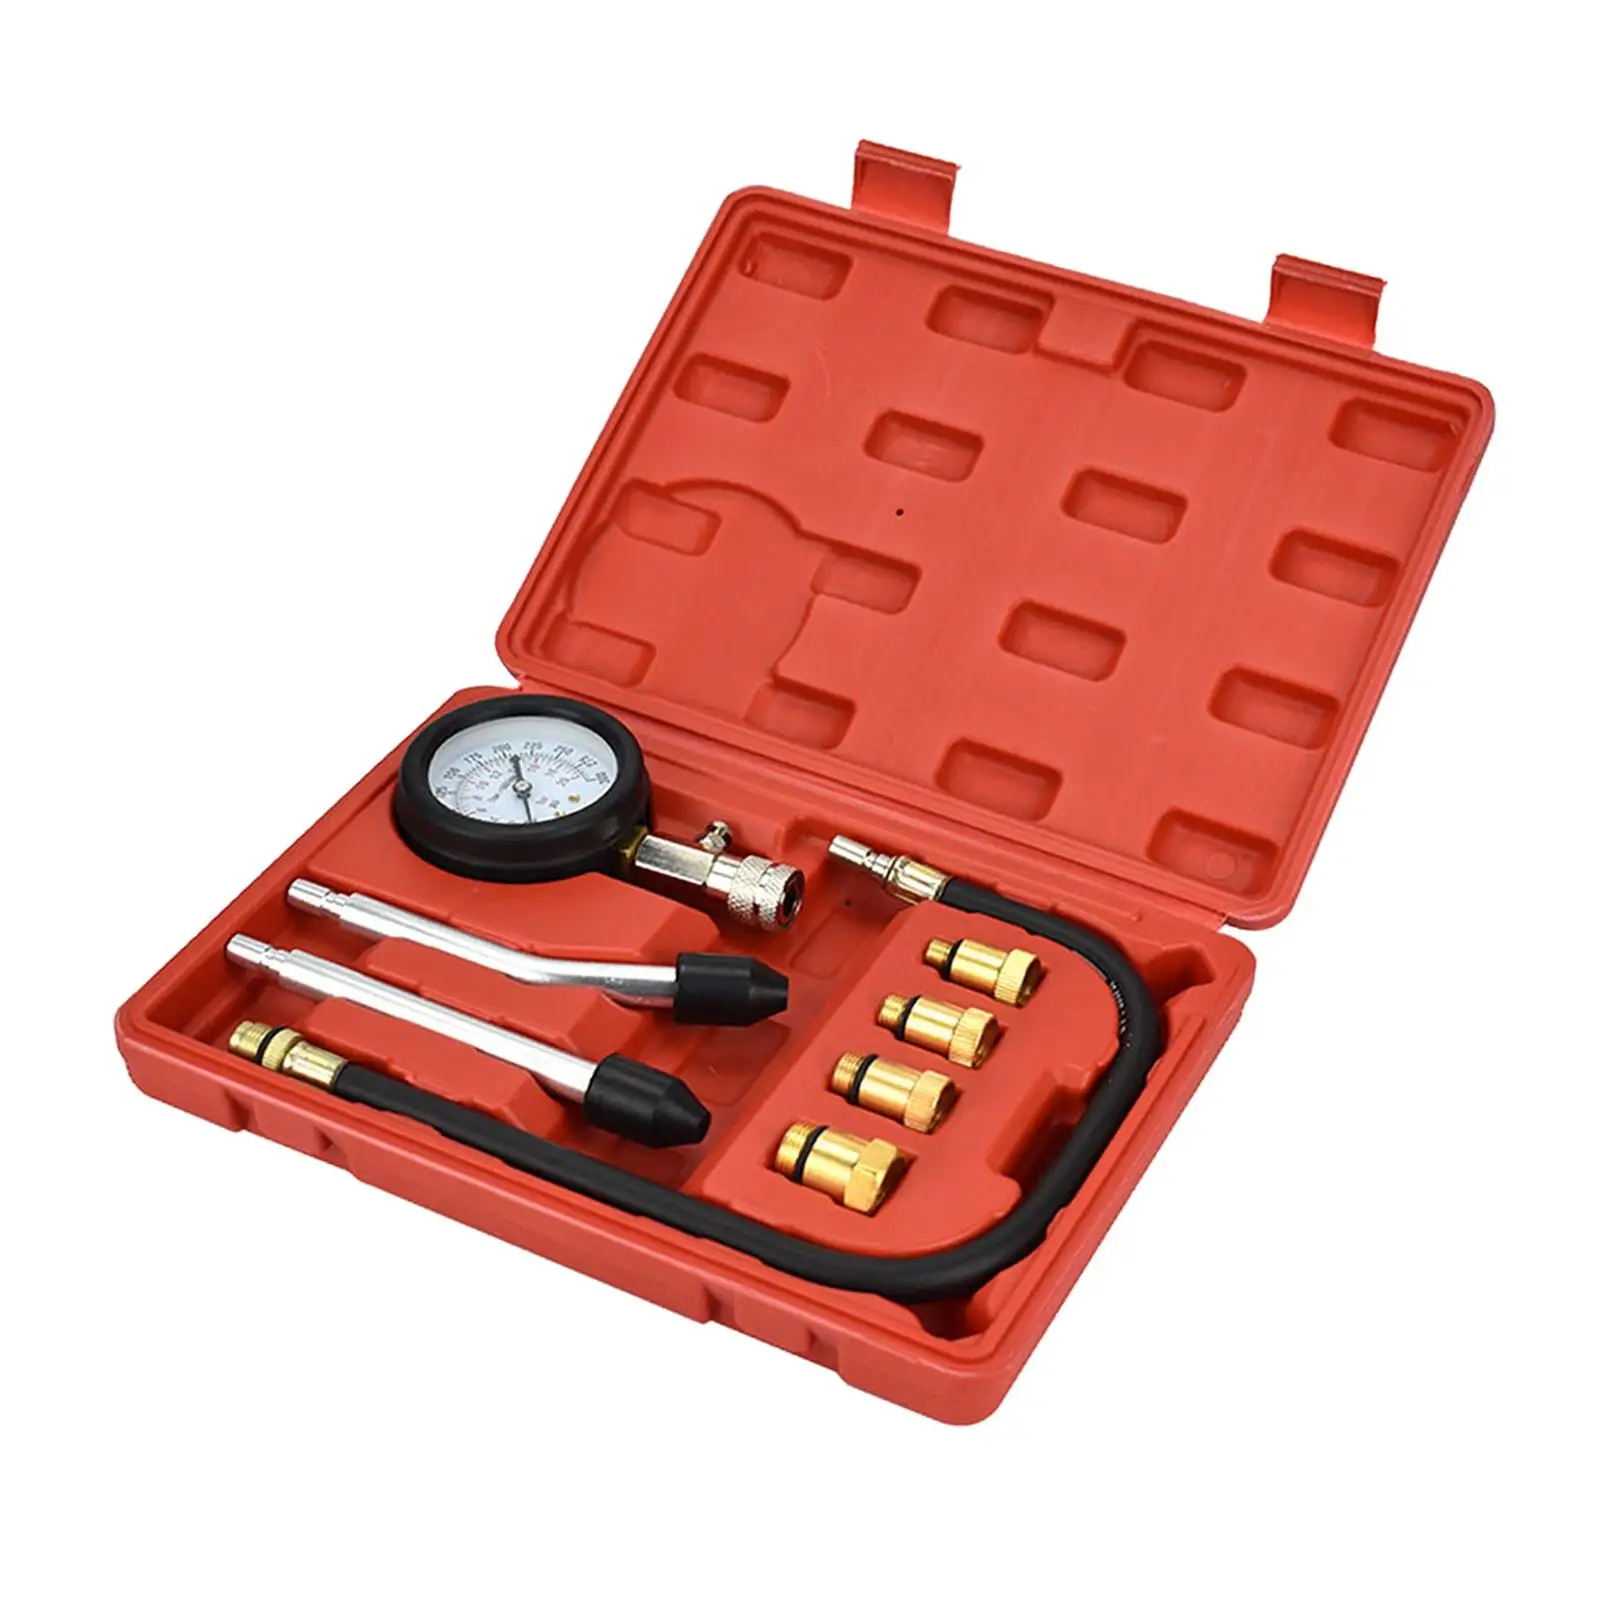 8Pcs Car Gas Engine Cylinder Compression Tester Gauge Kit 0-300 PSI with Case 4 Brass Adapter in Different Size Leakage Test